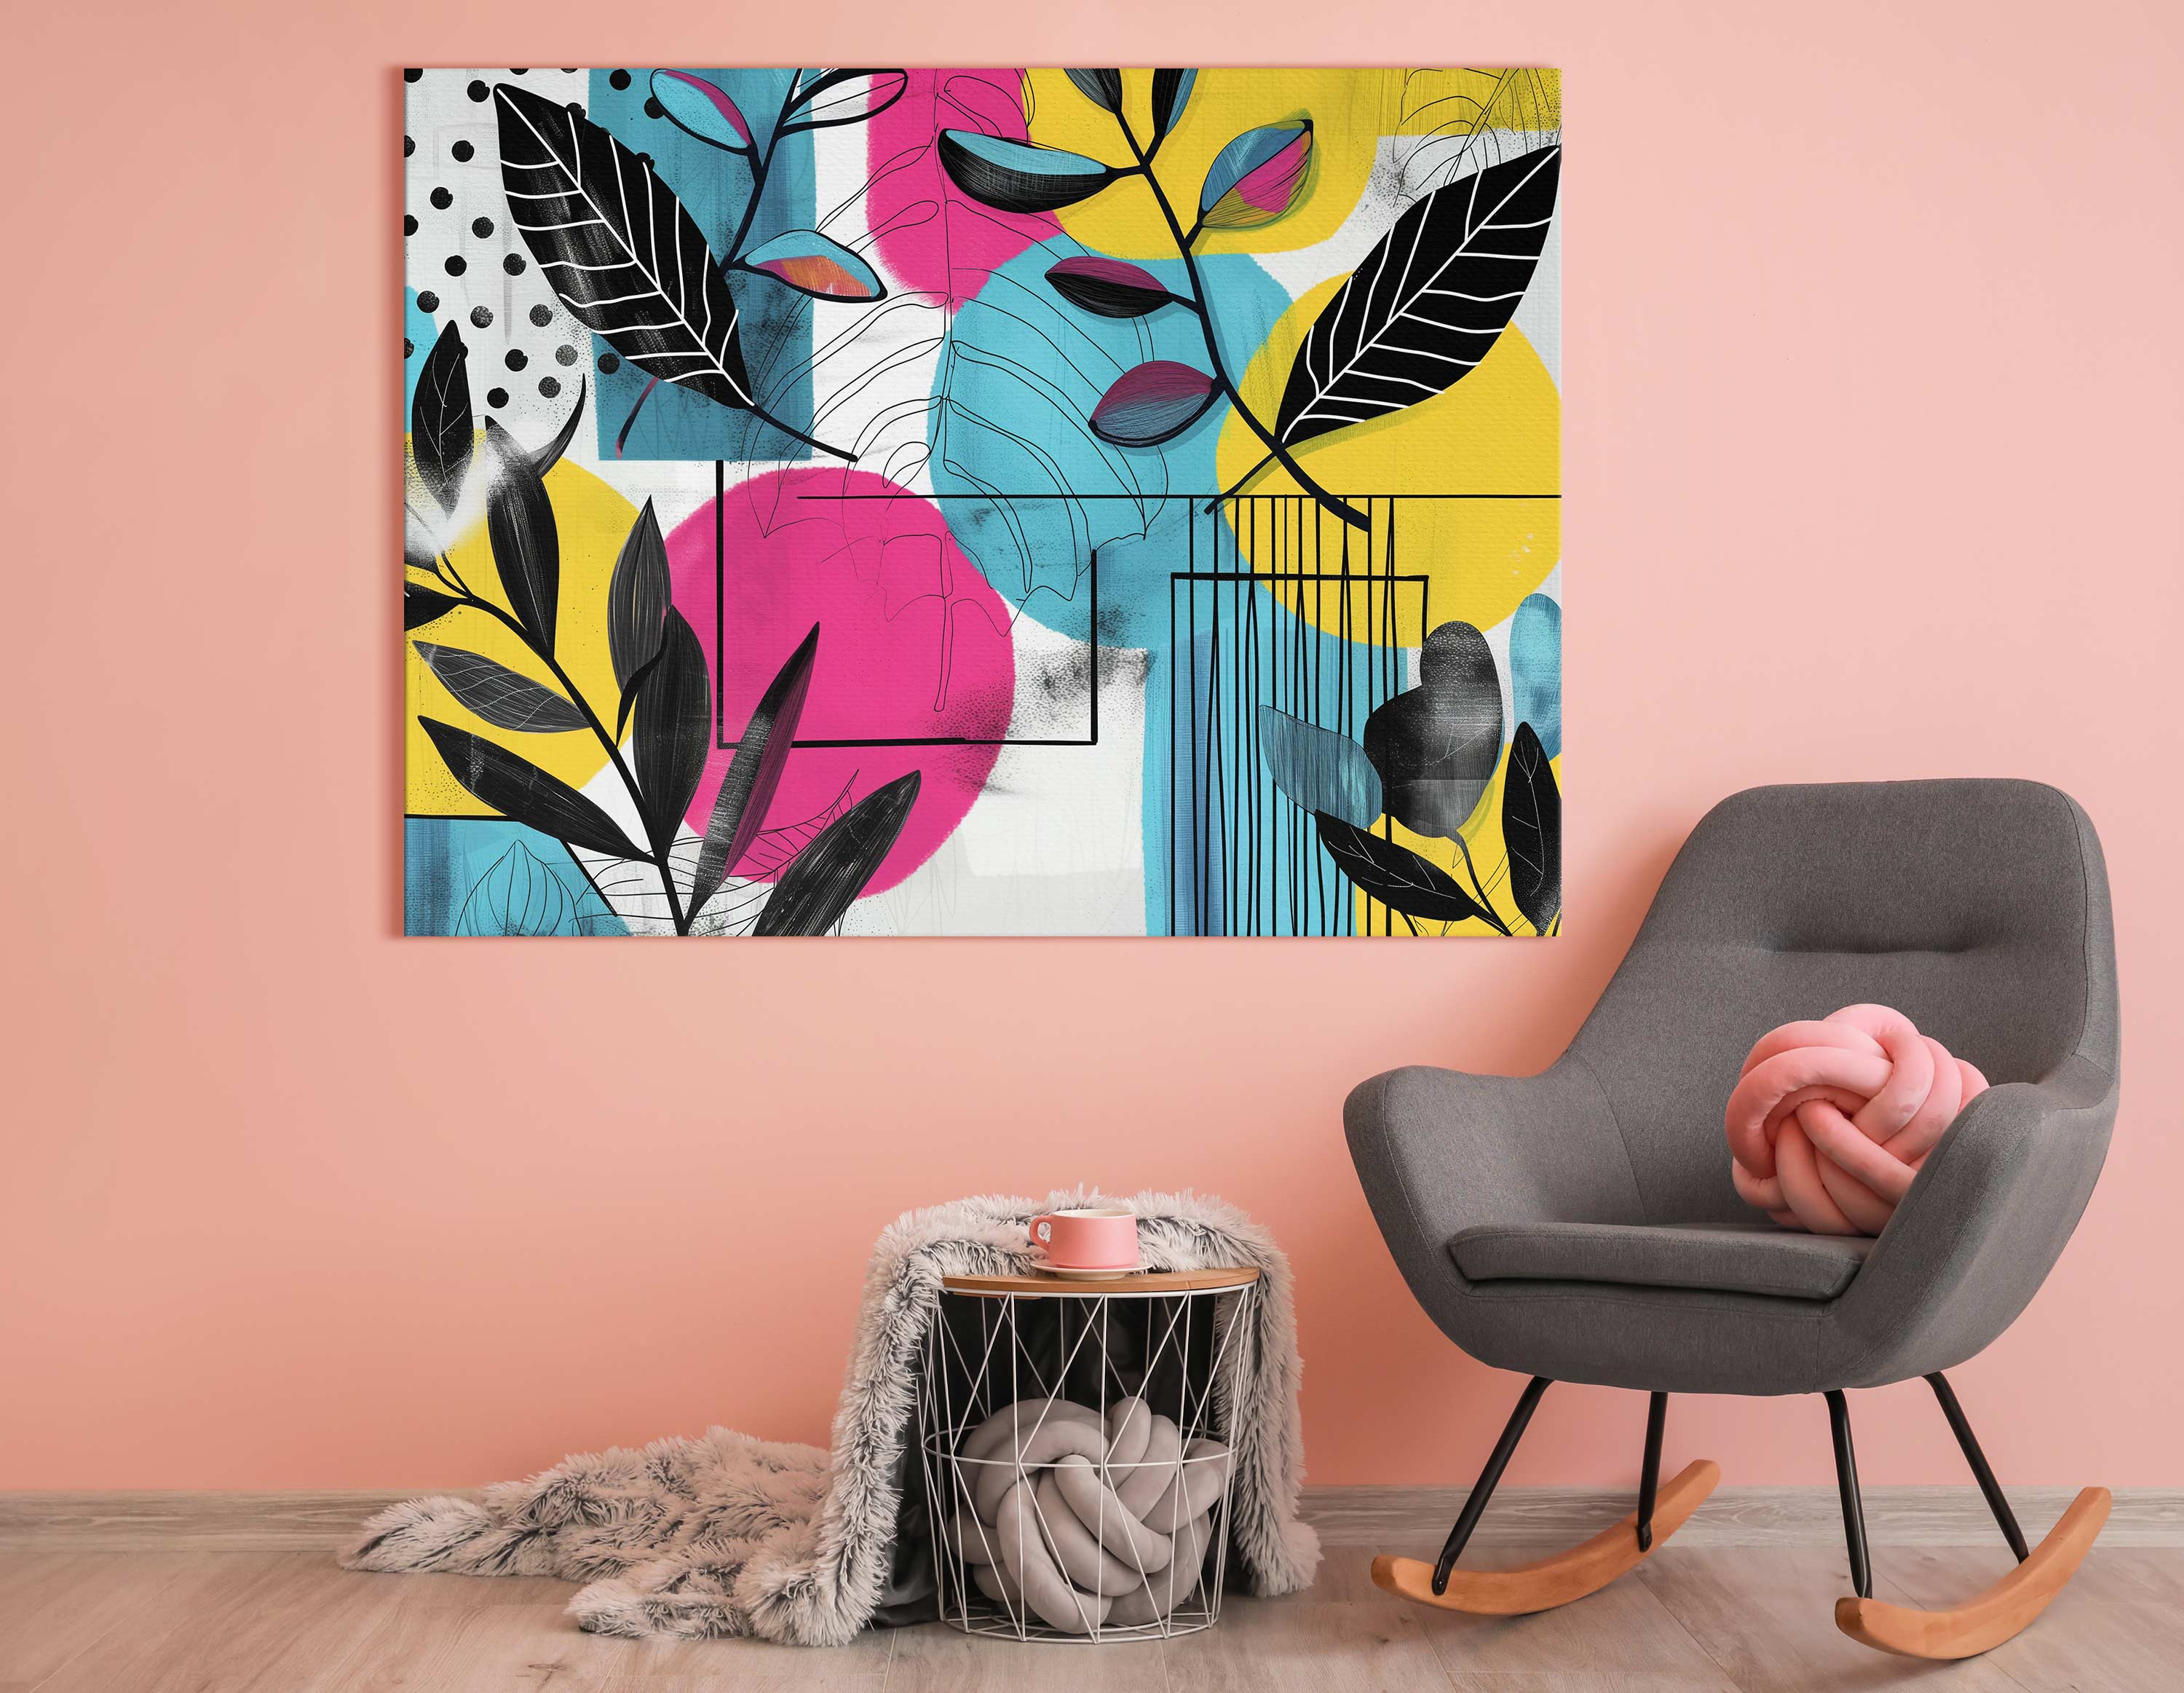 Artistic Pink, Blue, and Yellow Artwork